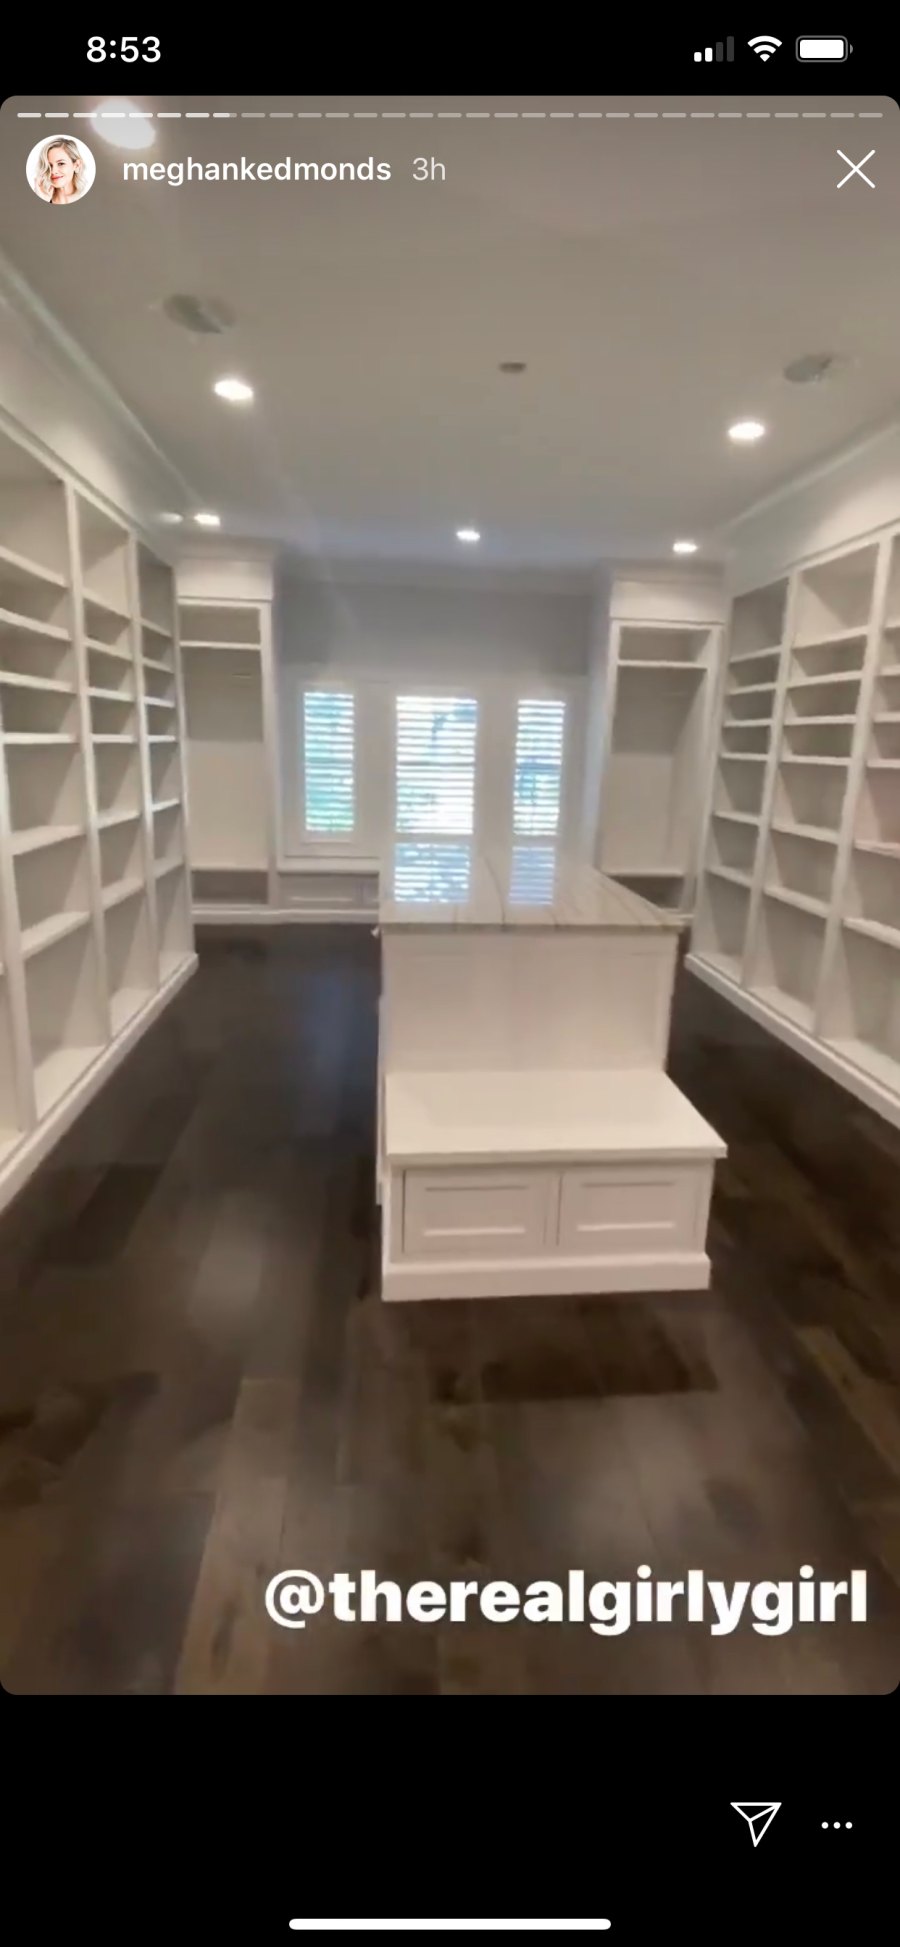 Meghan King Edmonds Shows Off Her New Home With a Bowling Alley and More